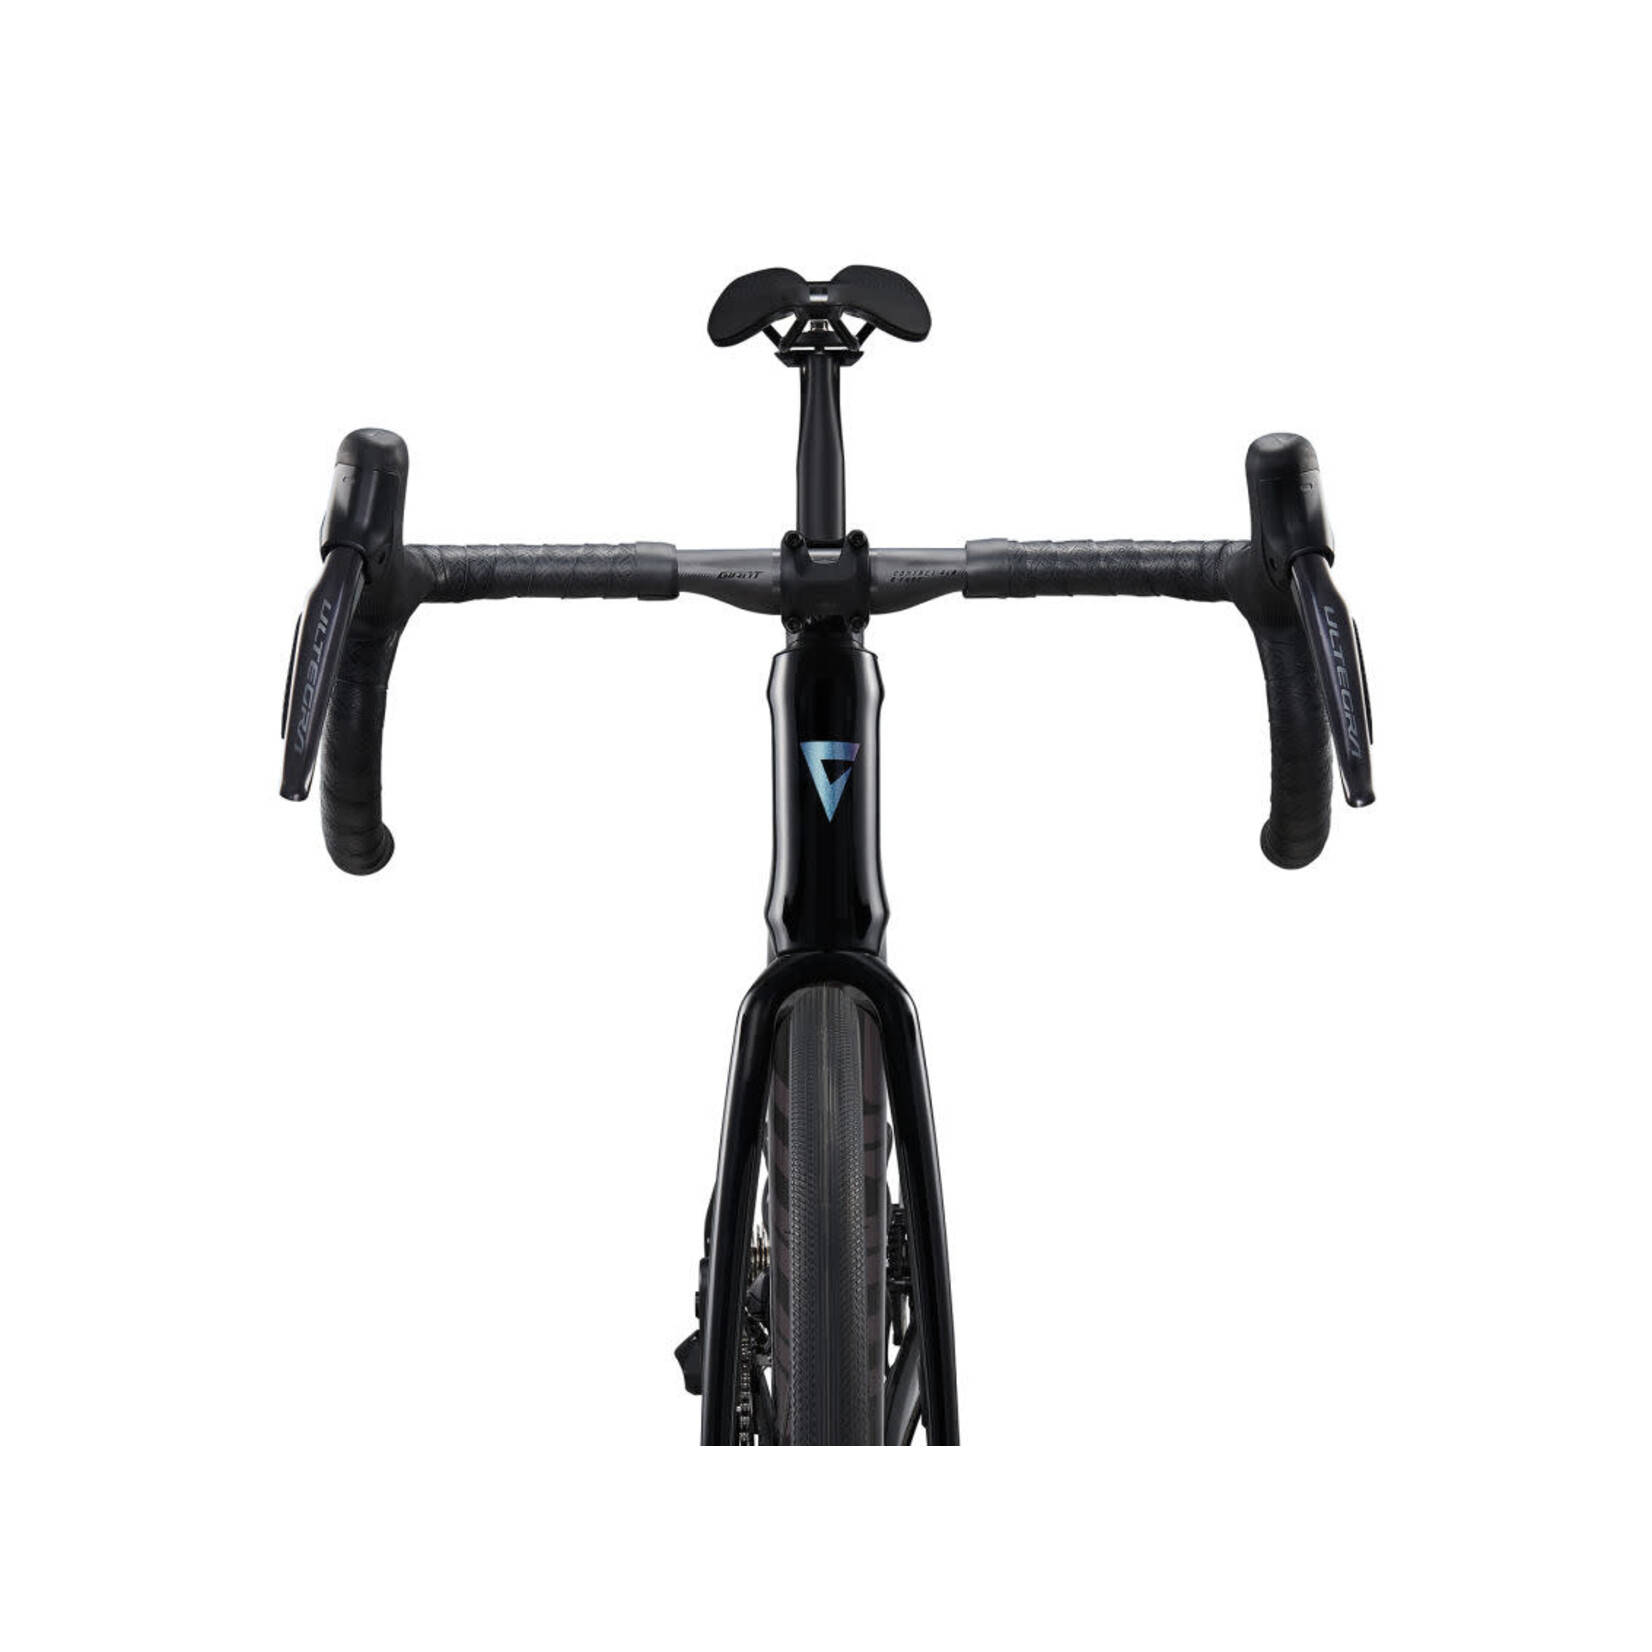 GIANT Defy Advanced Pro 0 - Carbon/Blue Dragonfly